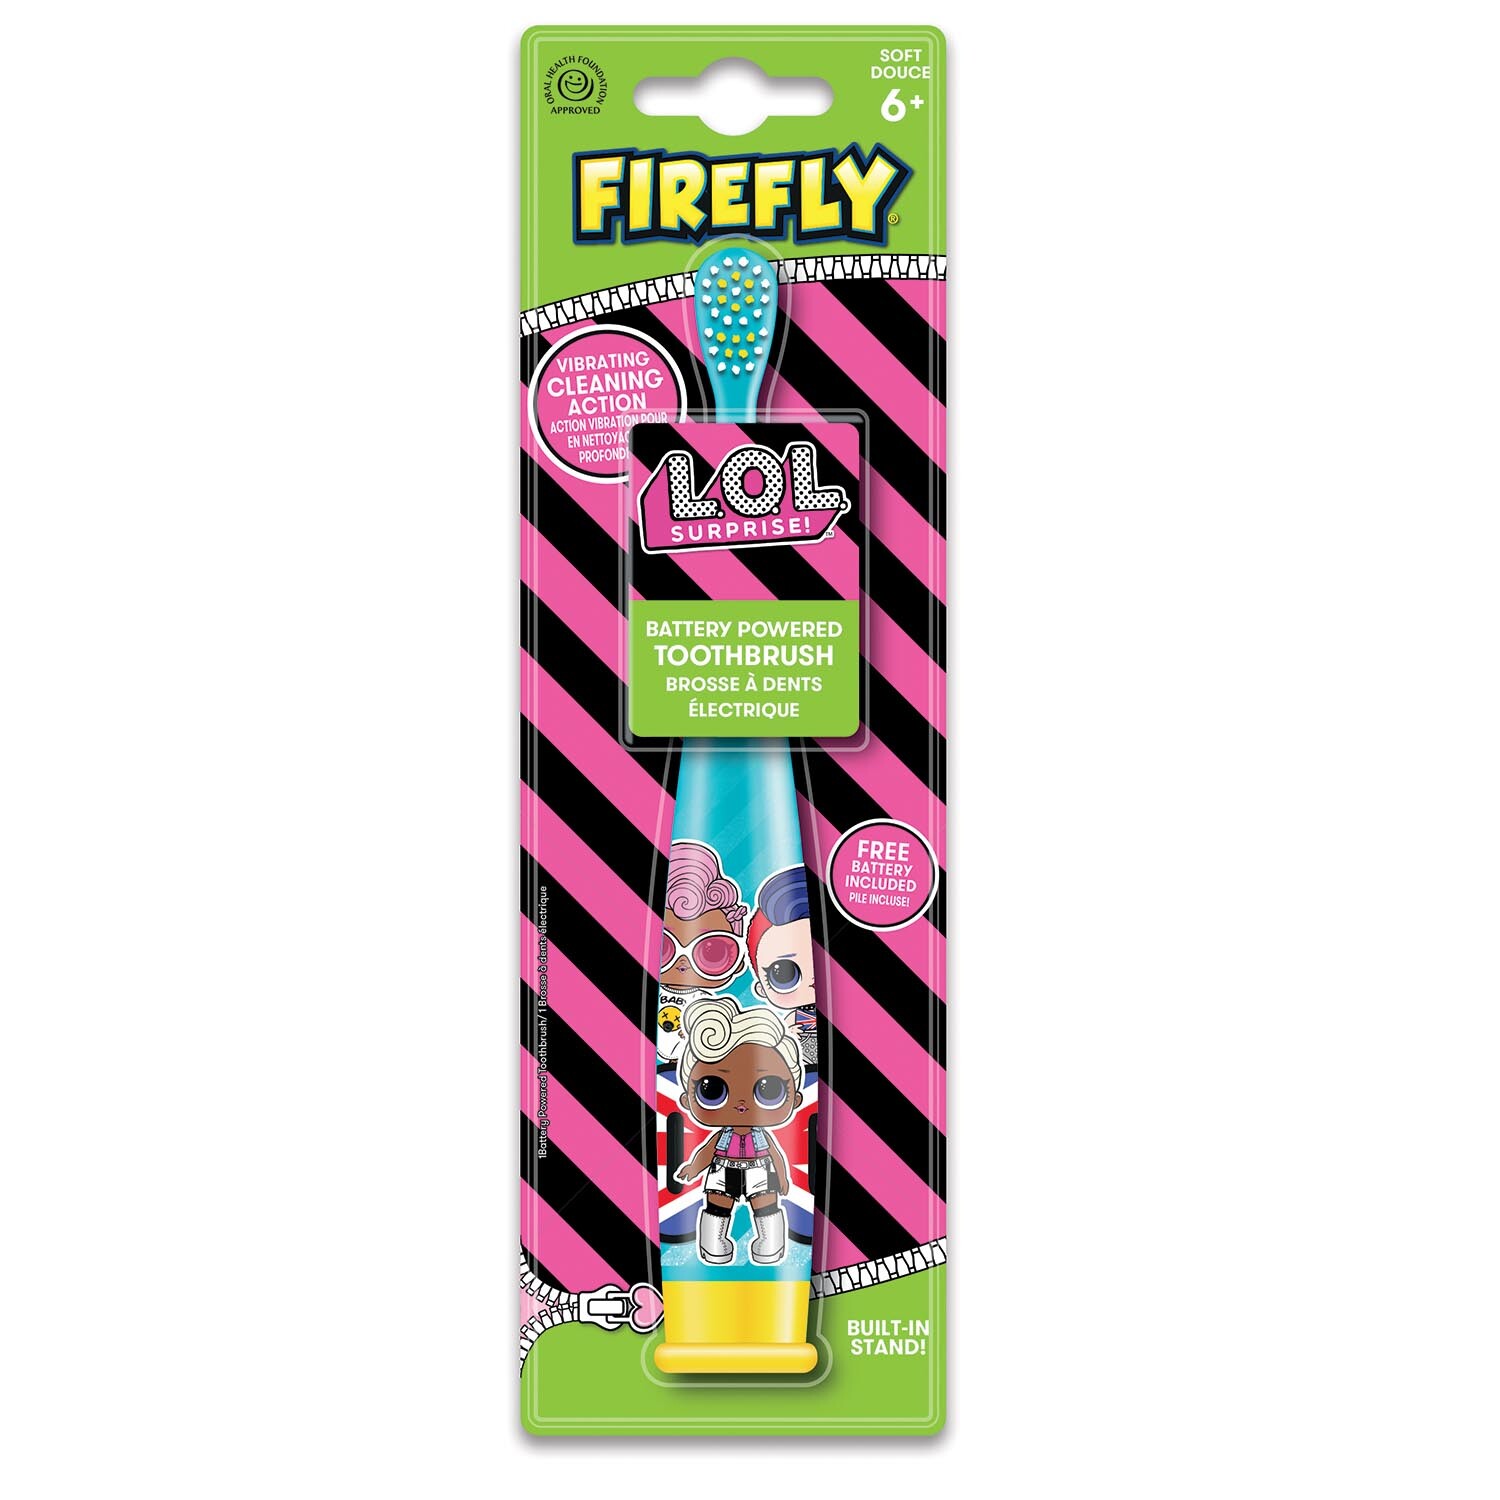 Firefly L.O.L. Surprise! TurboMax Toothbrush Image 2